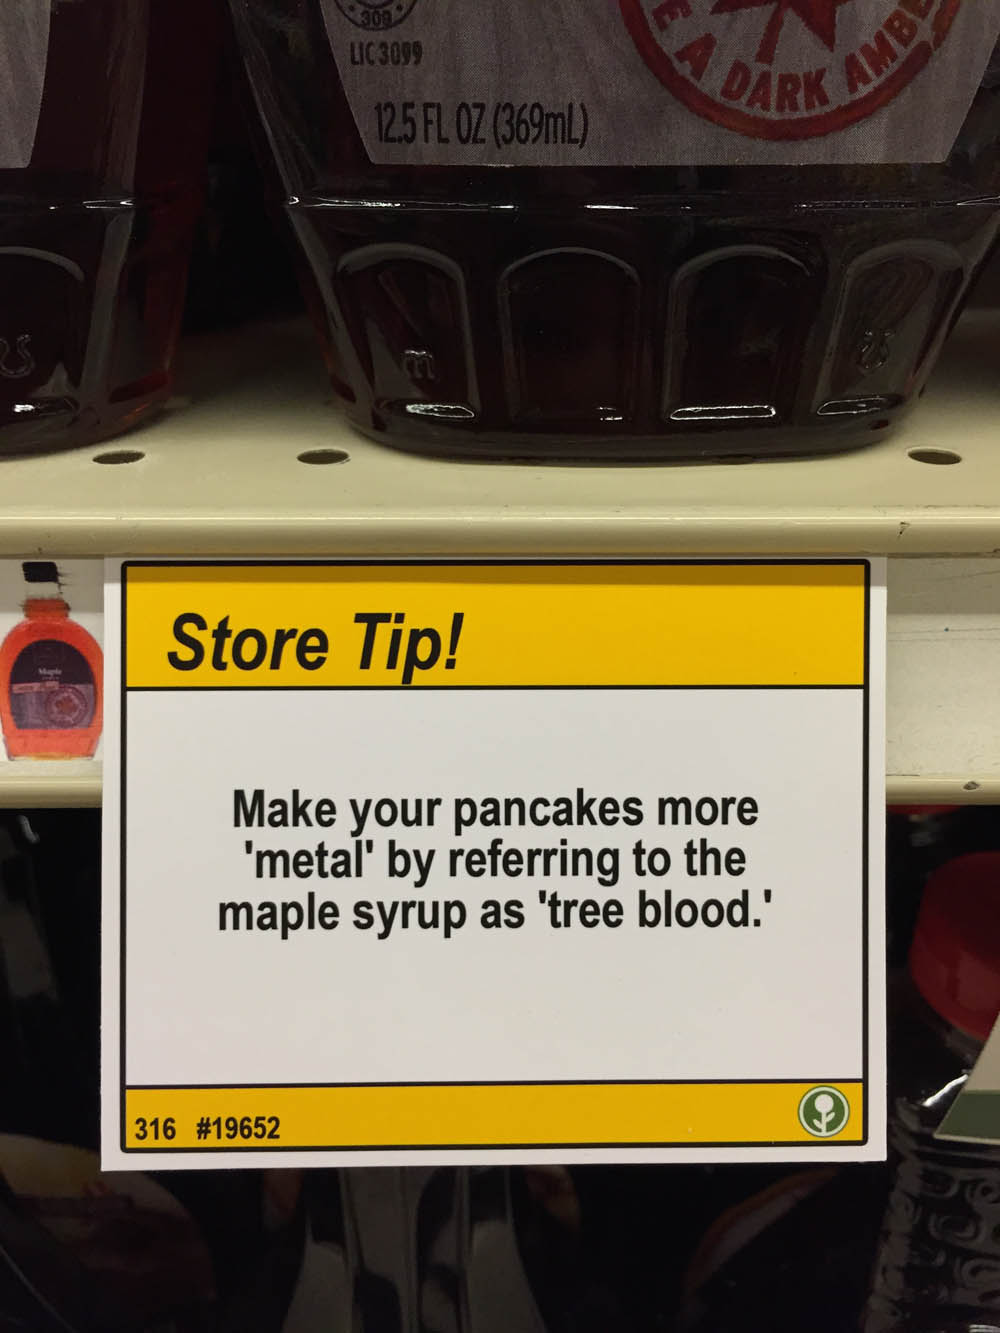 hilarious prank - 09 Lic 3099 Darka 12.5 Fl Oz 369mL Store Tip! Make your pancakes more 'metal by referring to the maple syrup as 'tree blood.' 316